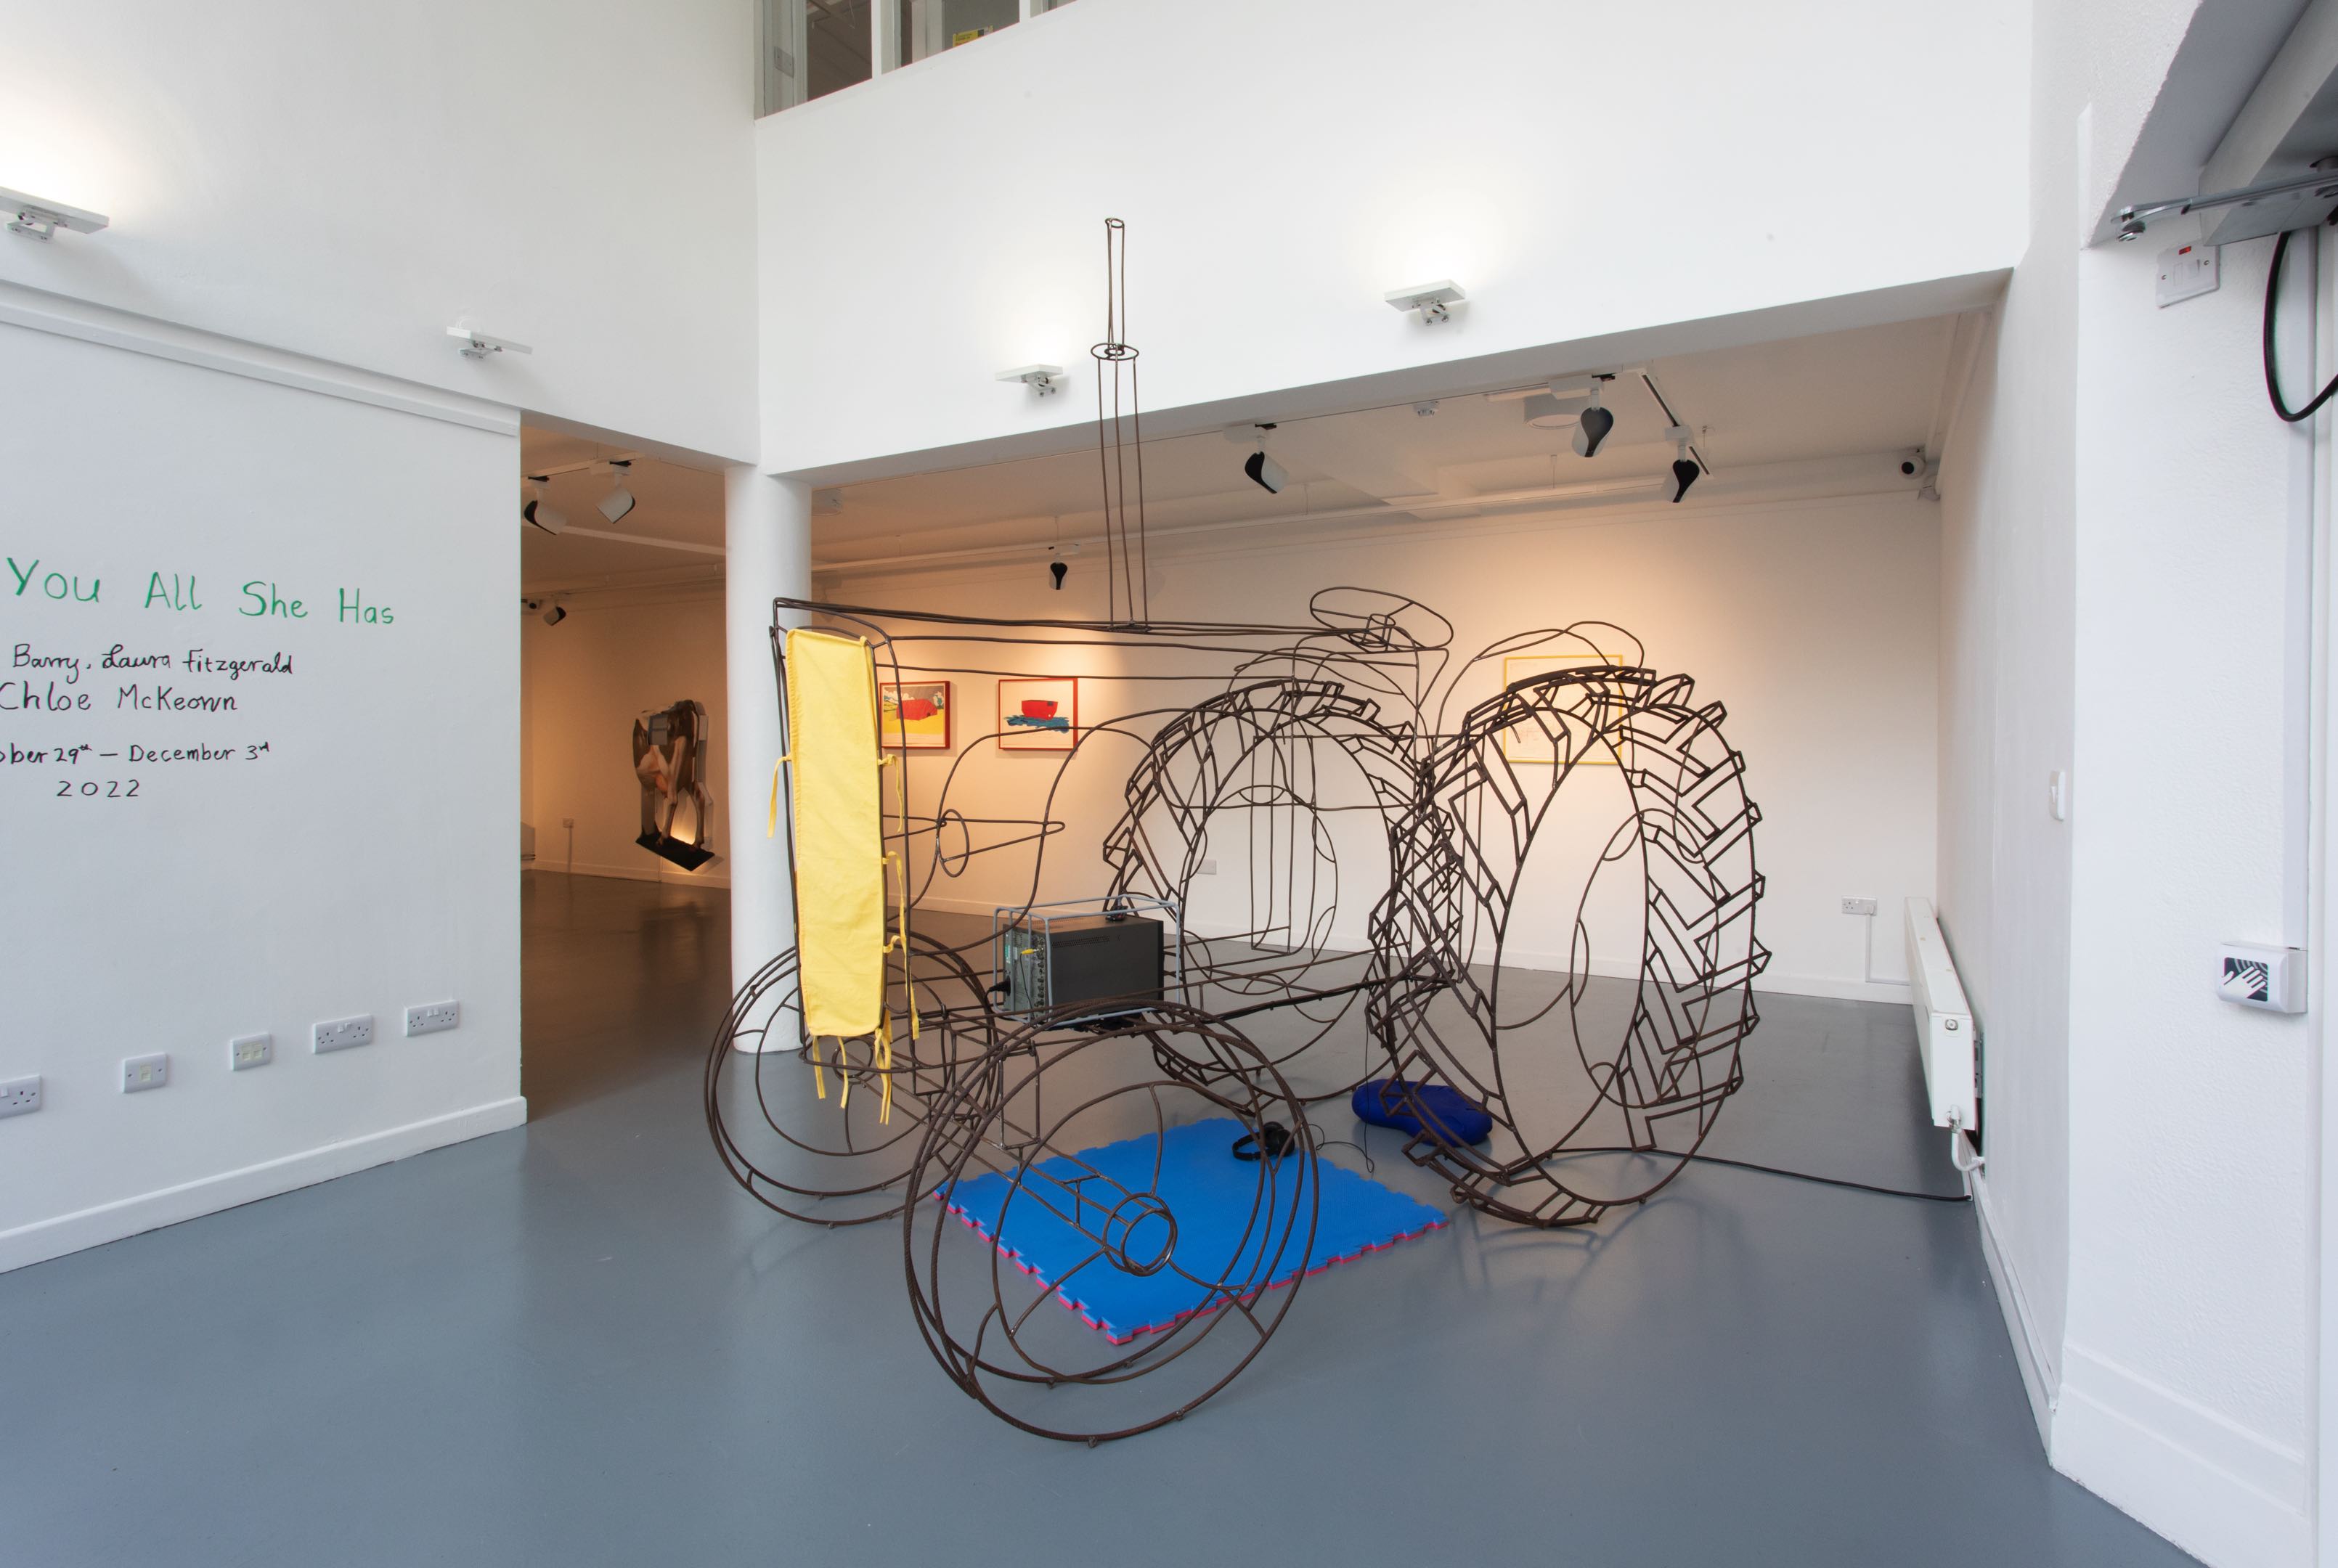 Laura Fitzgerald - David Brown's Enterprise, Micheál fitzgerald bended & LF welded 8 & 10mm round bar with 12 mm rebar, detensioned by BCD Tralee, sweat & tears, dimensions variable, 2022